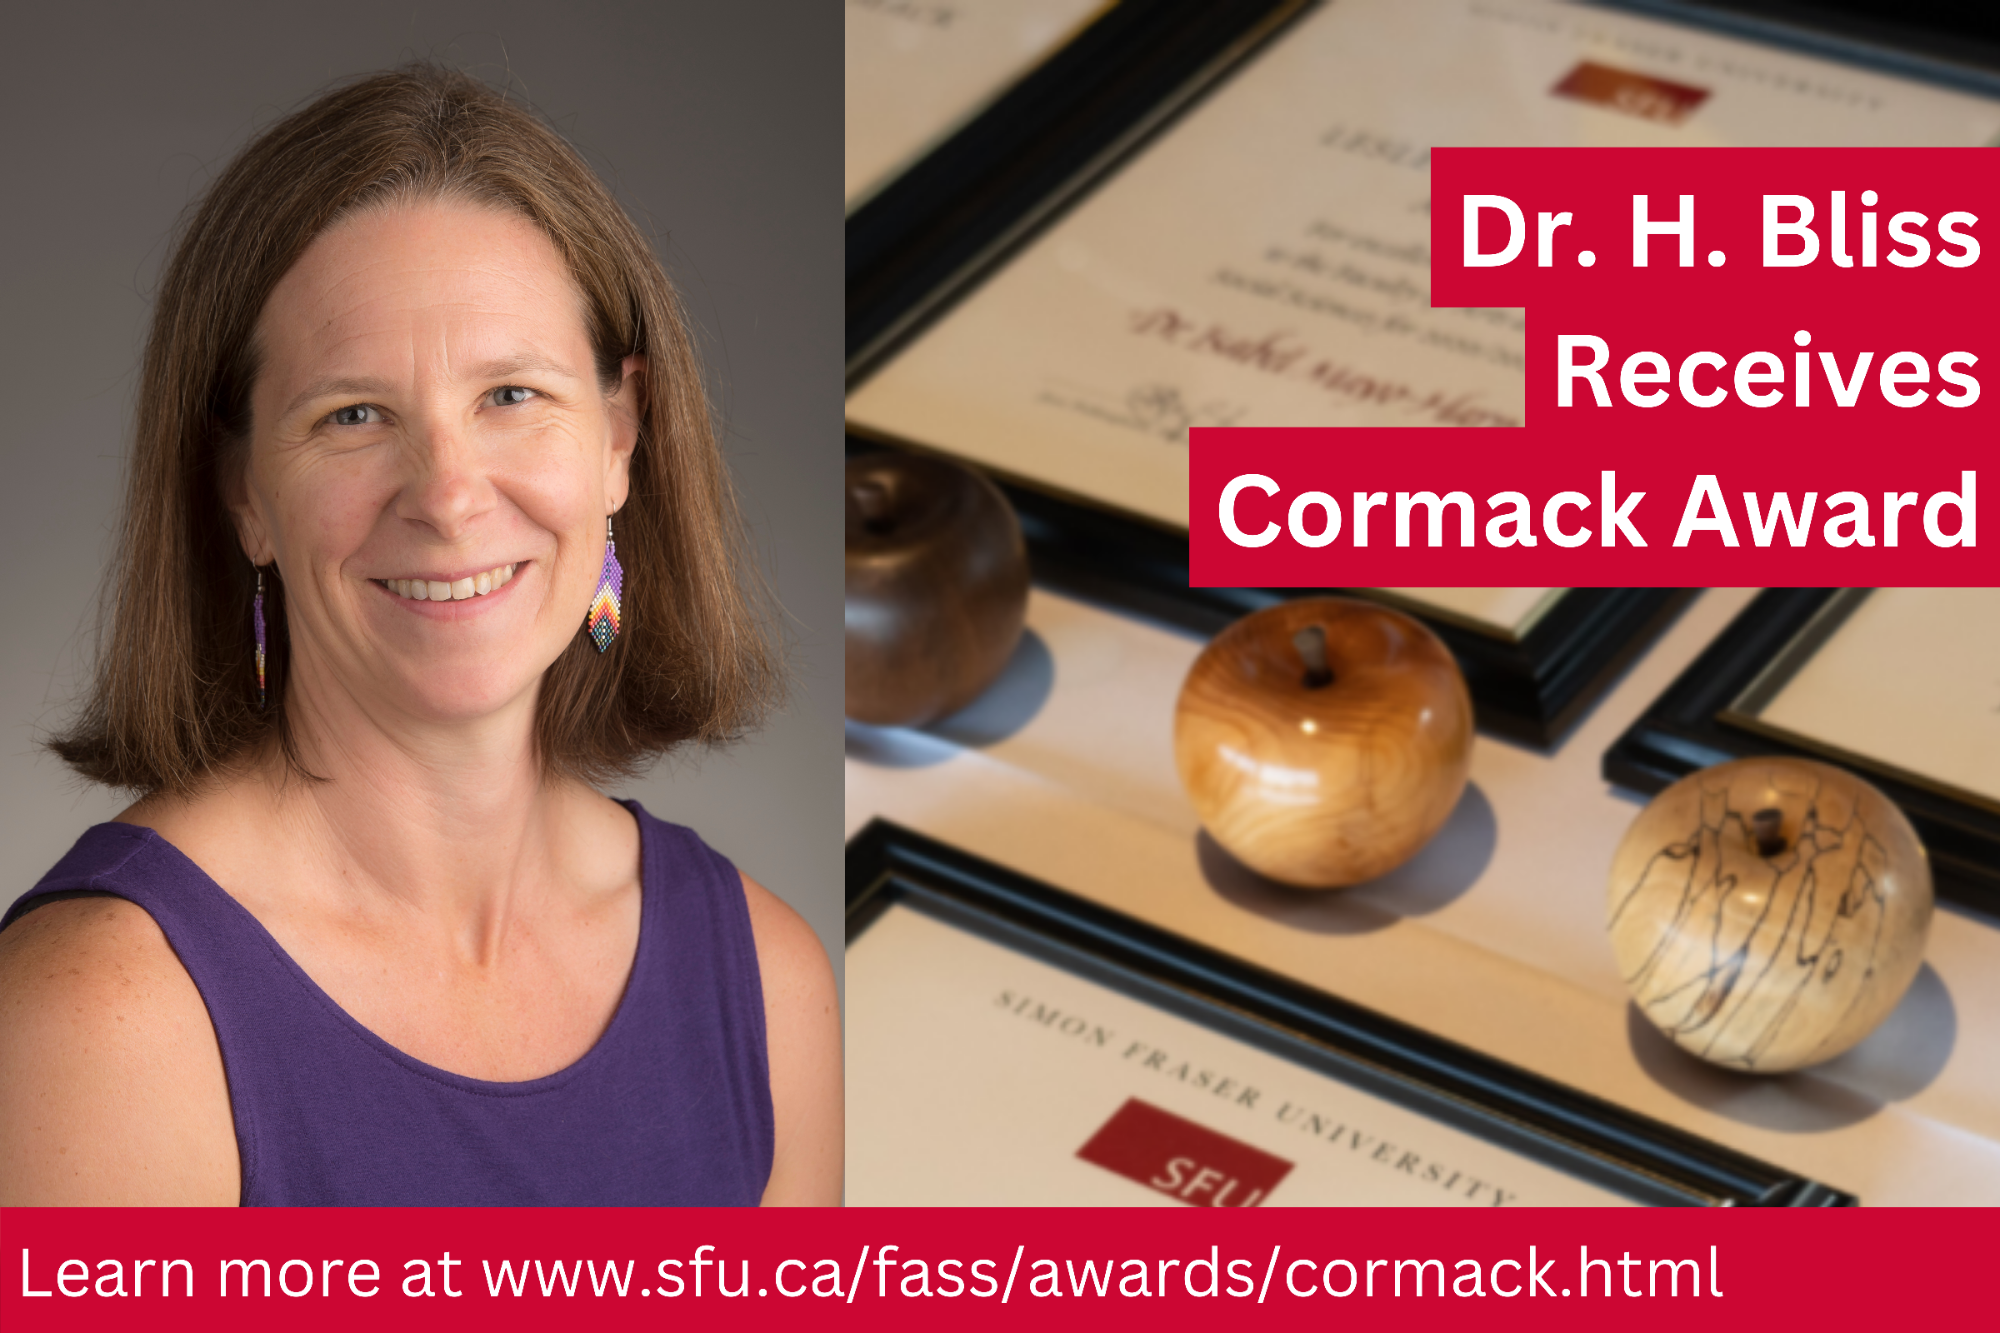 Learn more at www.sfu.ca/fass/awards/cormack.html - 1